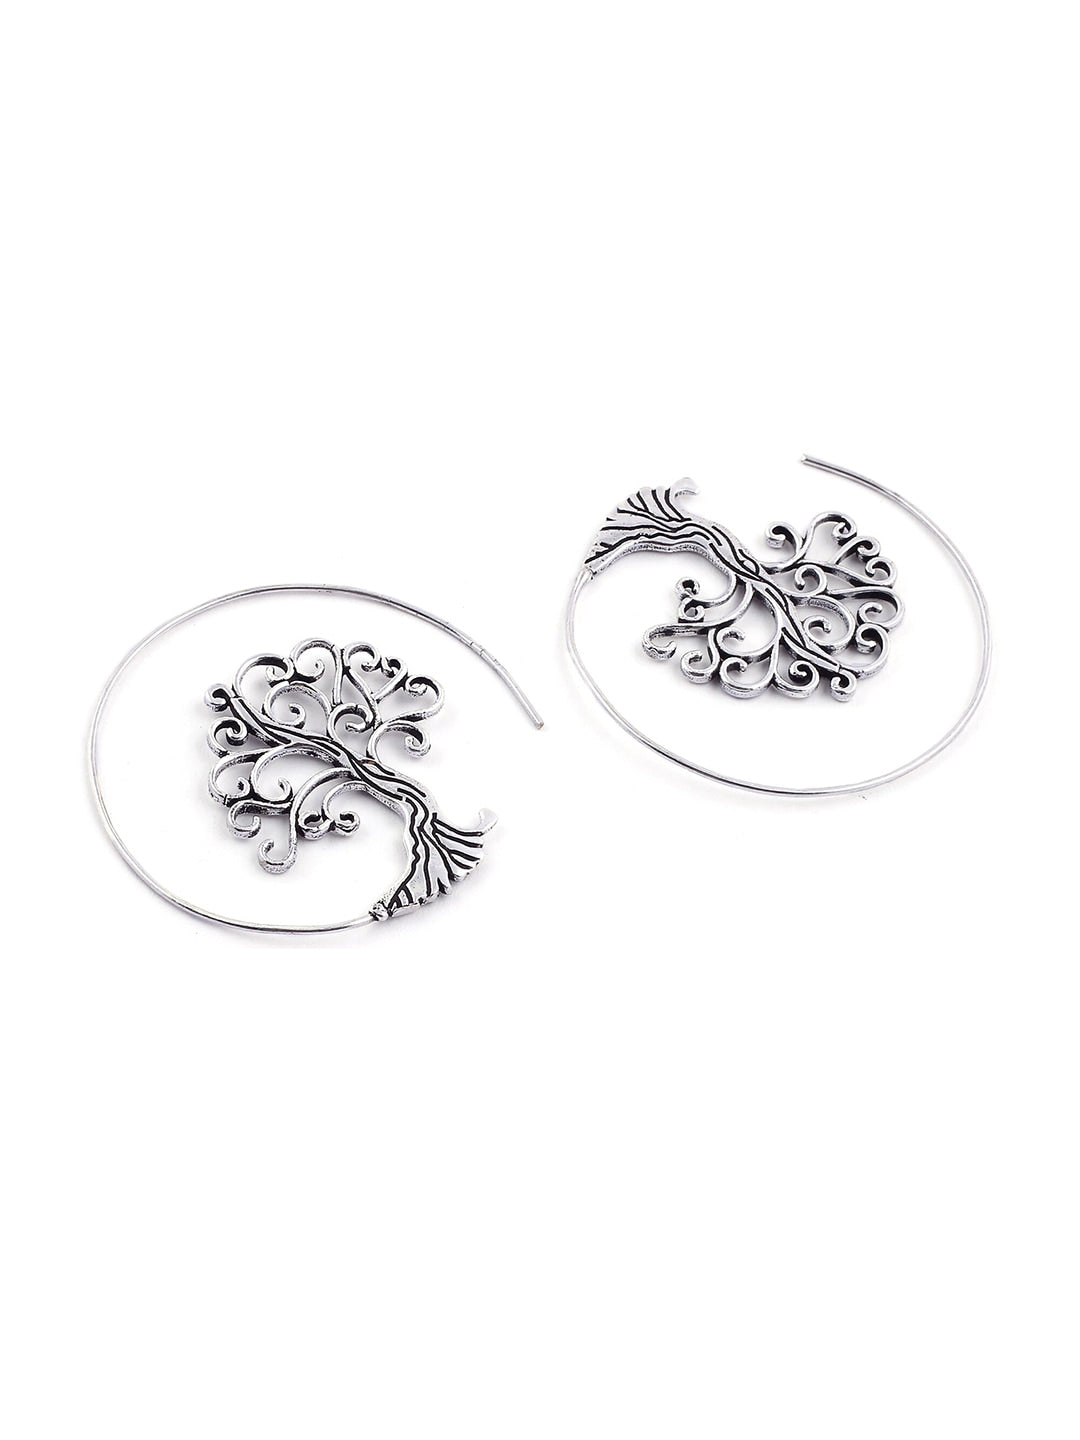 EL REGALO Silver-Toned Contemporary Drop Earrings - for Women and Girls
Style ID: 17227274